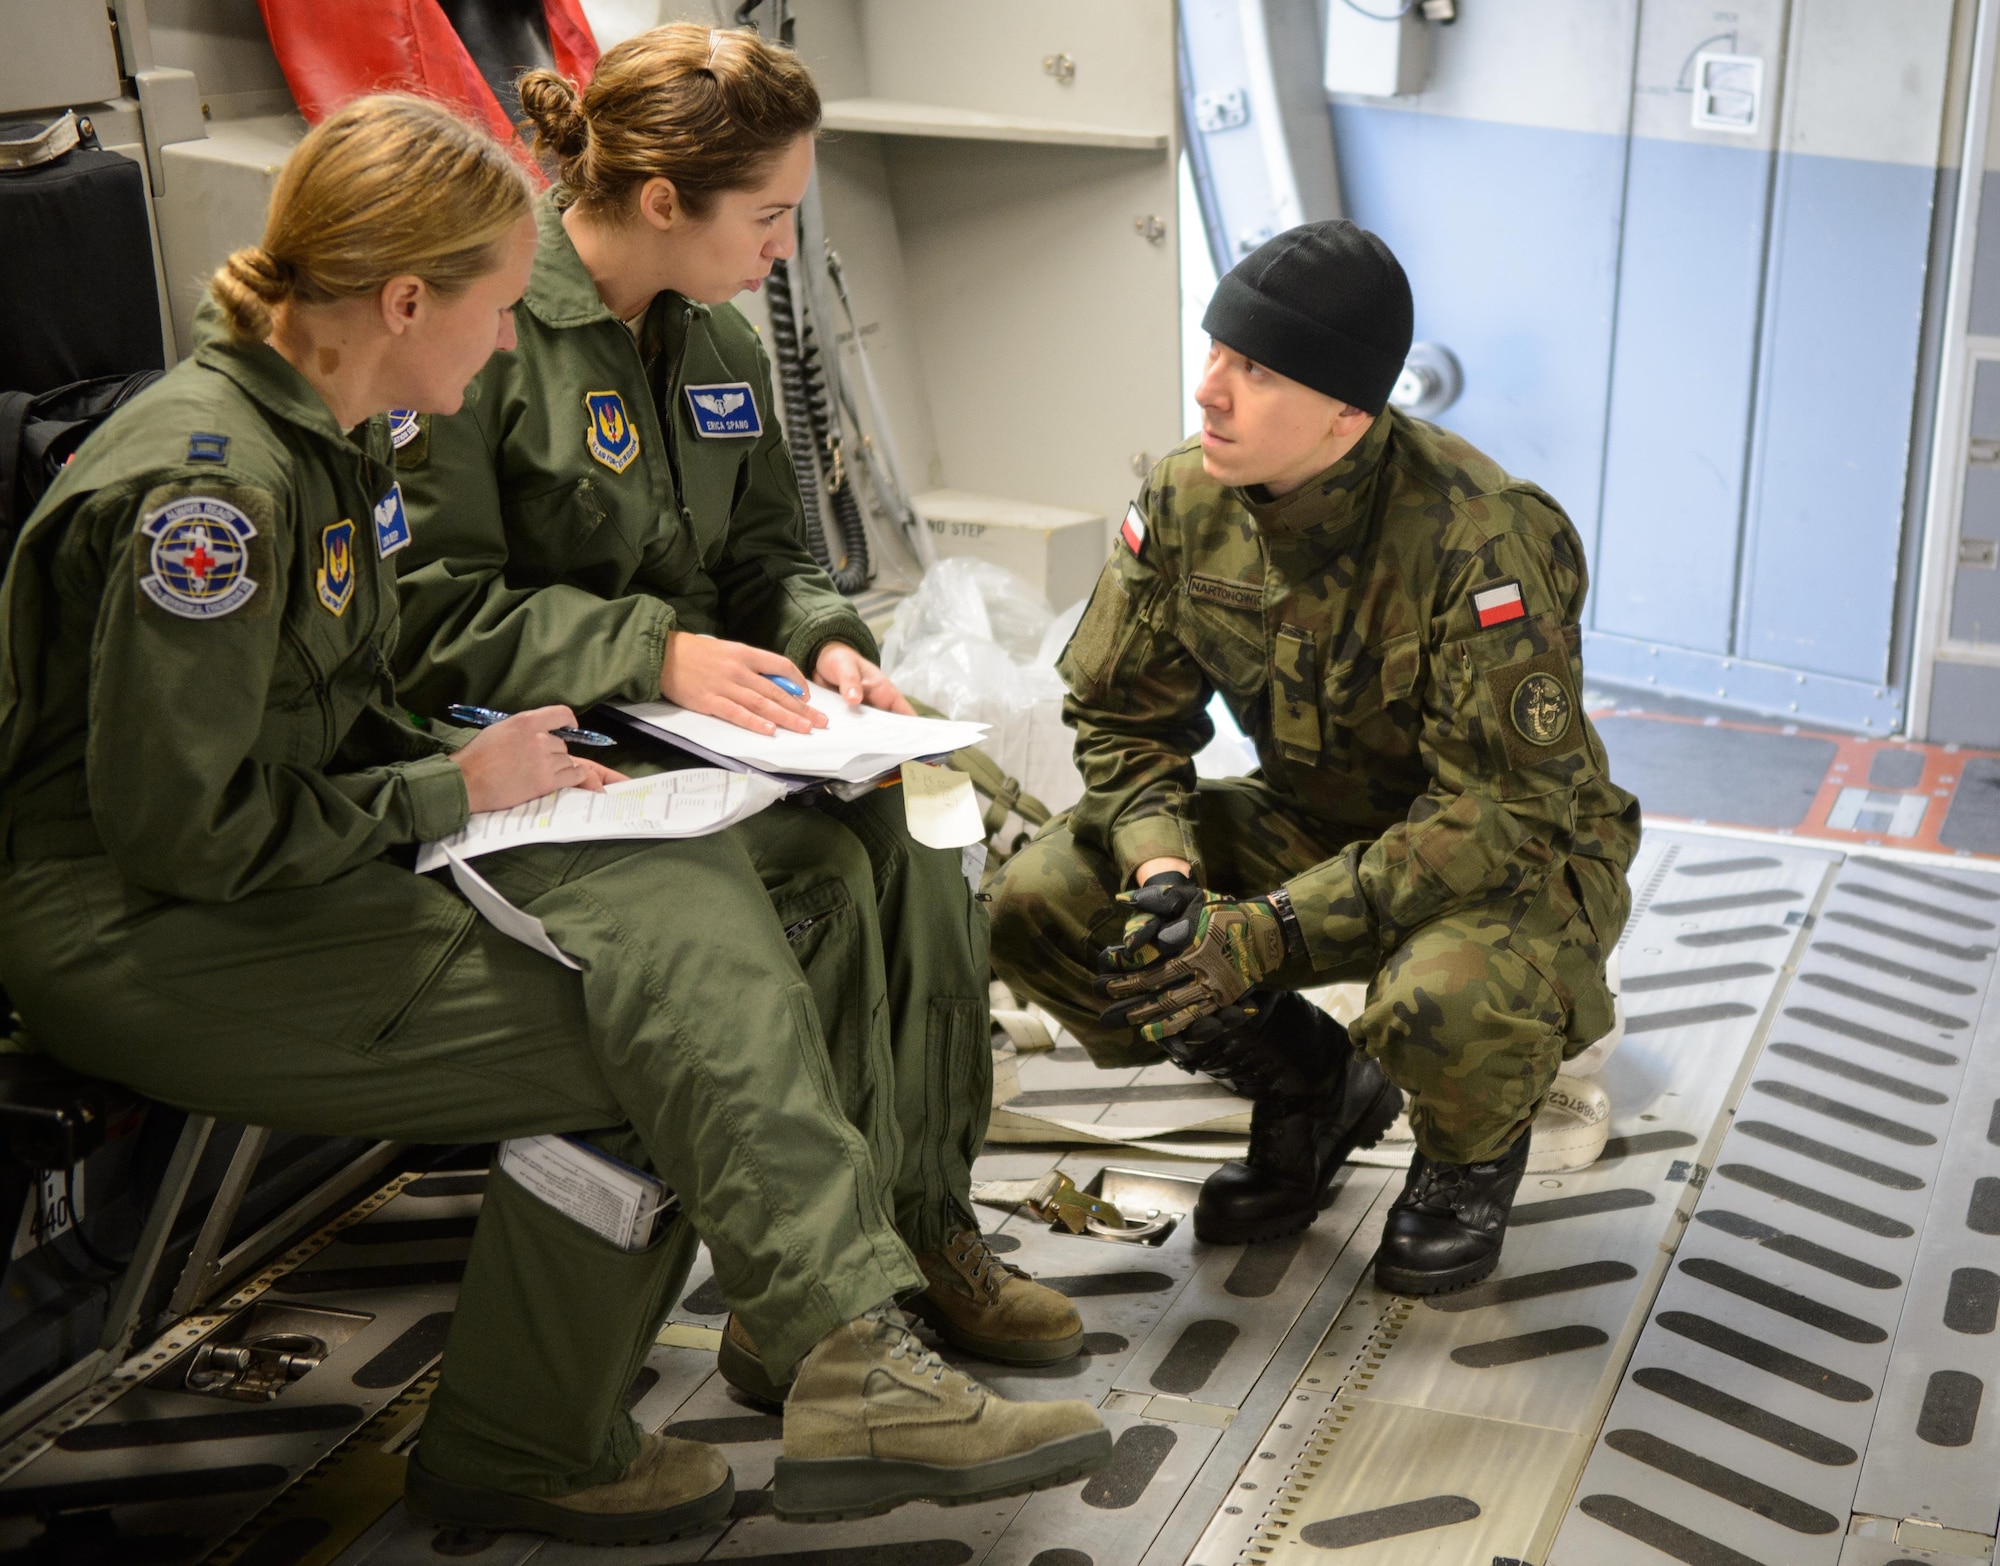 Polish Air Force 2nd Lt. Andrzej Nartonowicz, an aeromedical evacuation doctor, listens to two 86th Aeromedical Evacuation Squadron Airmen as they prepare for a mock mission Dec. 3, 2015, at Ramstein Air Base, Germany. The 86th AES and other aeromedical evacuation specialists on Ramstein showcased procedures and tactics used to save lives for the developing Polish AE mission. (U.S. Air Force photo/Staff Sgt. Armando A. Schwier-Morales)